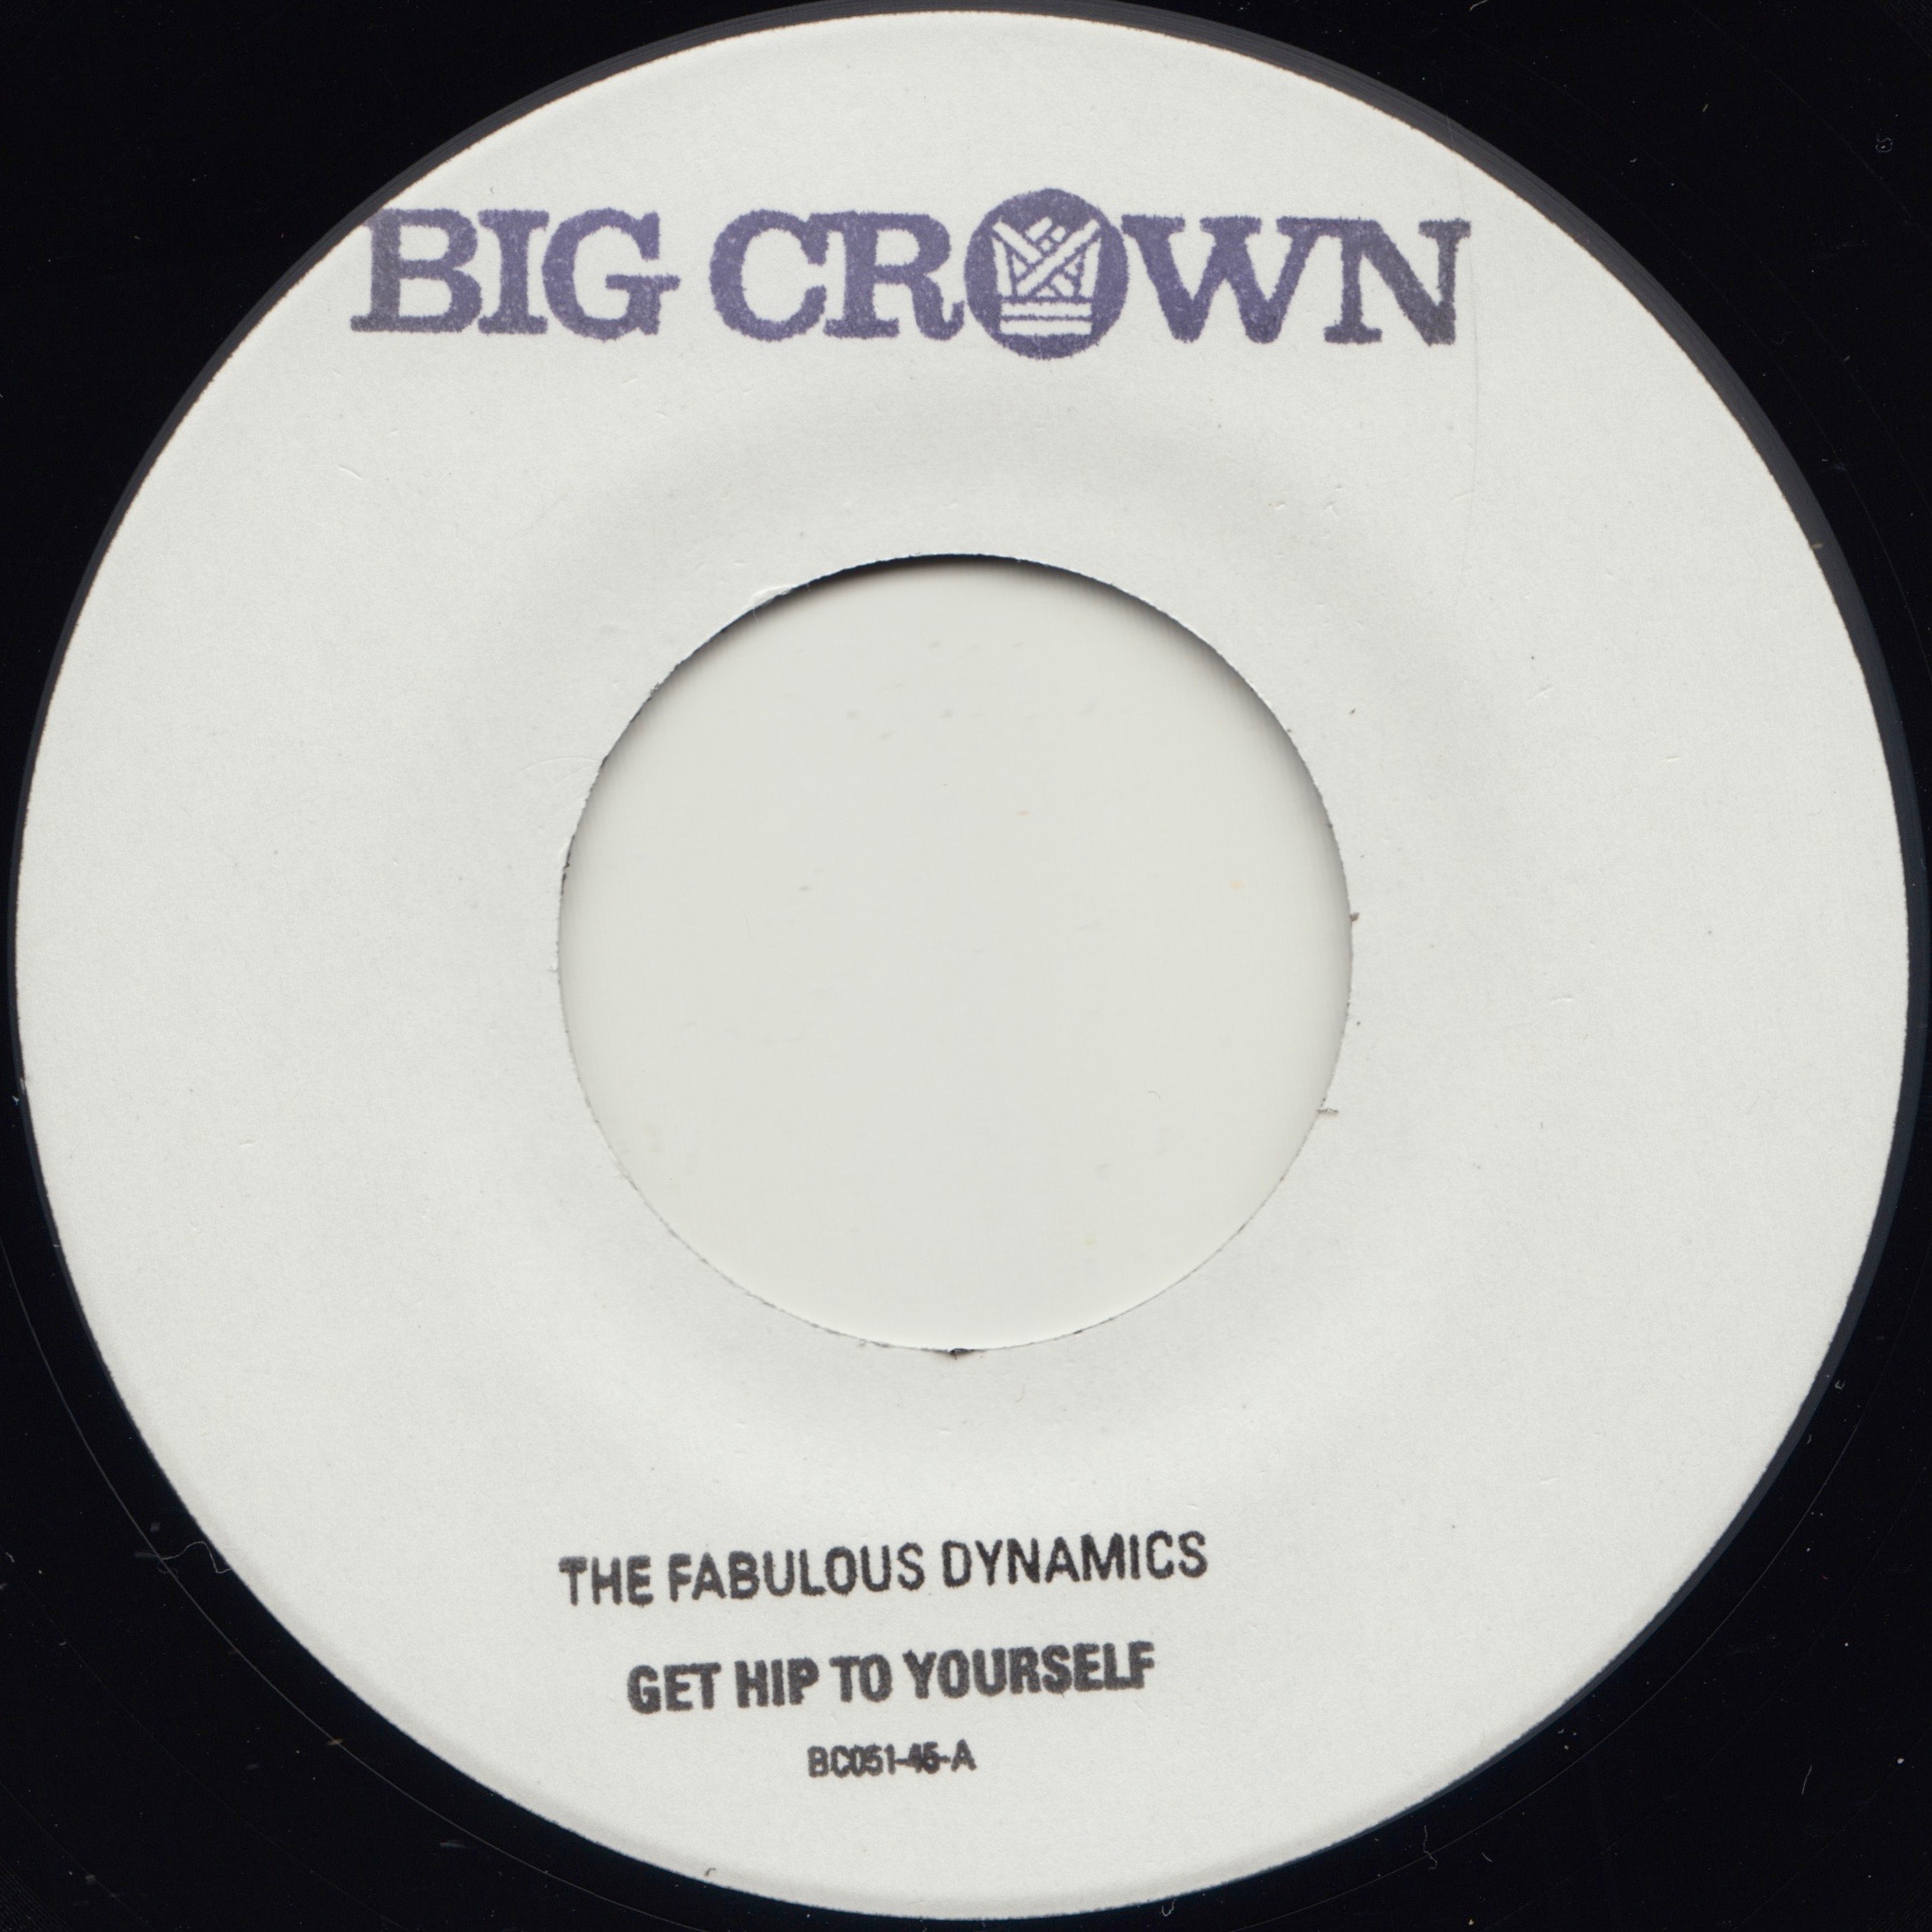 The Fabulous Dynamics get hip to yourself limited hand stamped big crown records